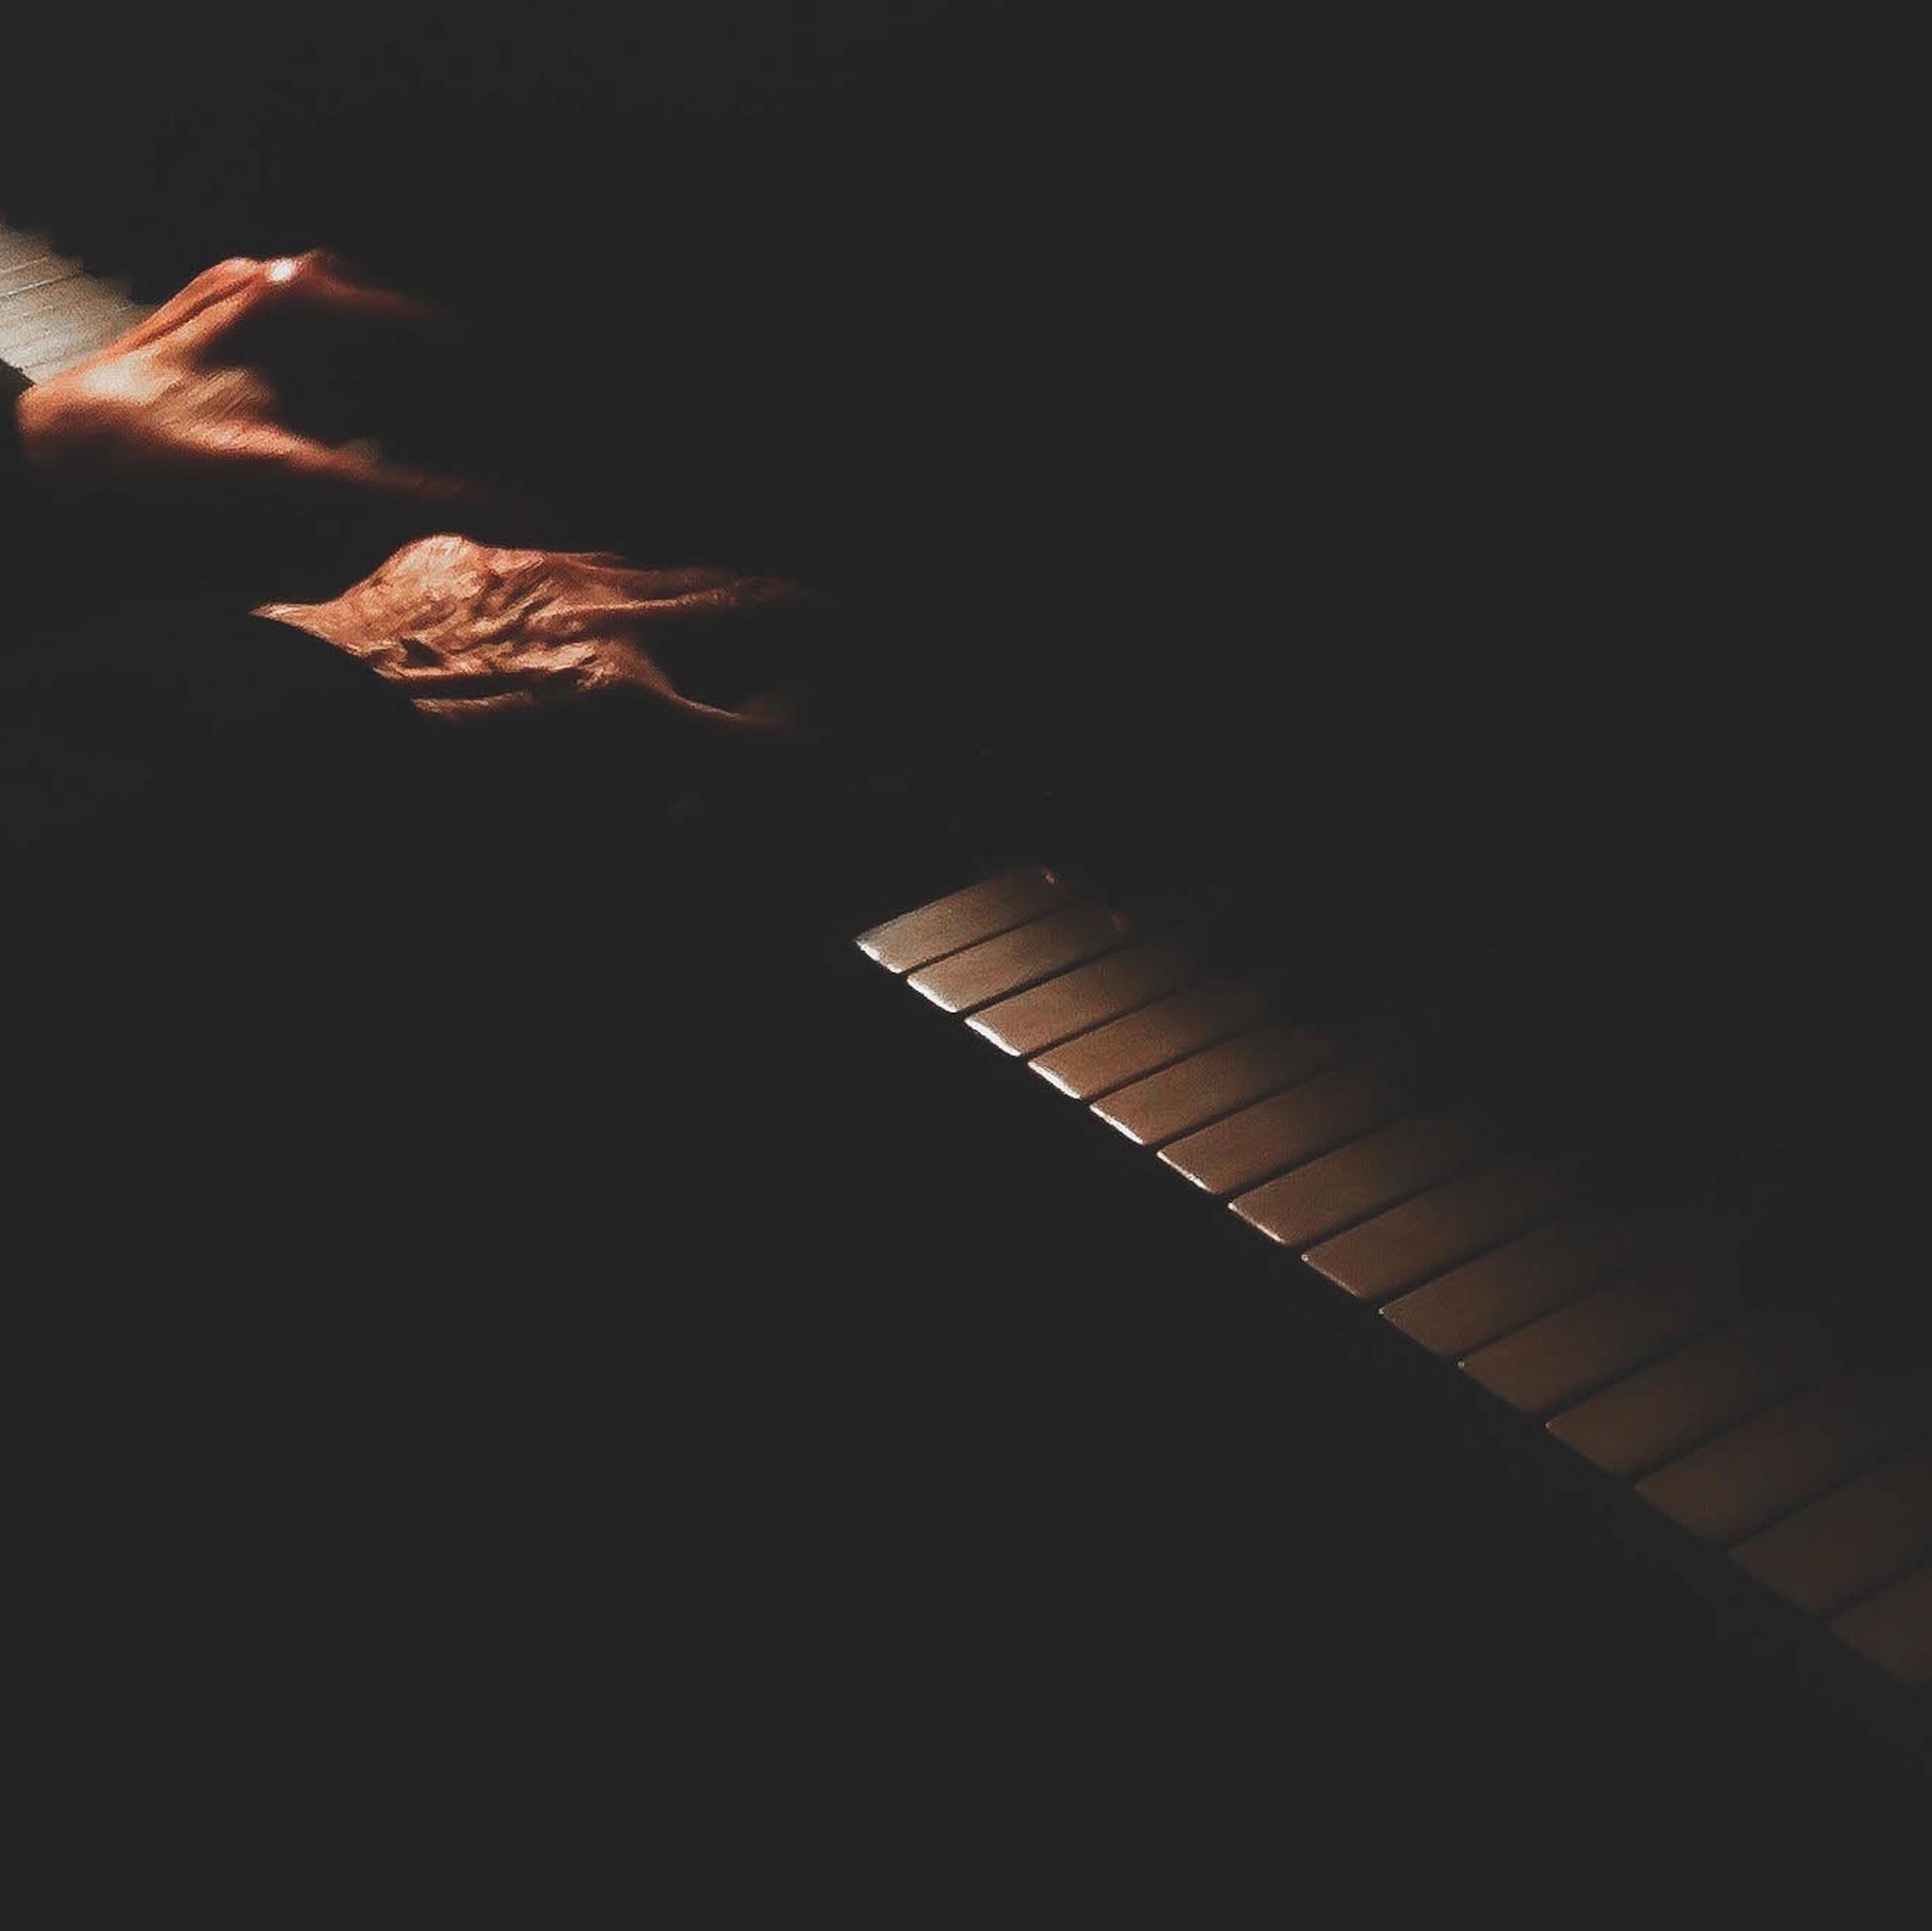 Essential Sensual Piano - 20 Tracks of Love & Intimacy for a Night of Romance